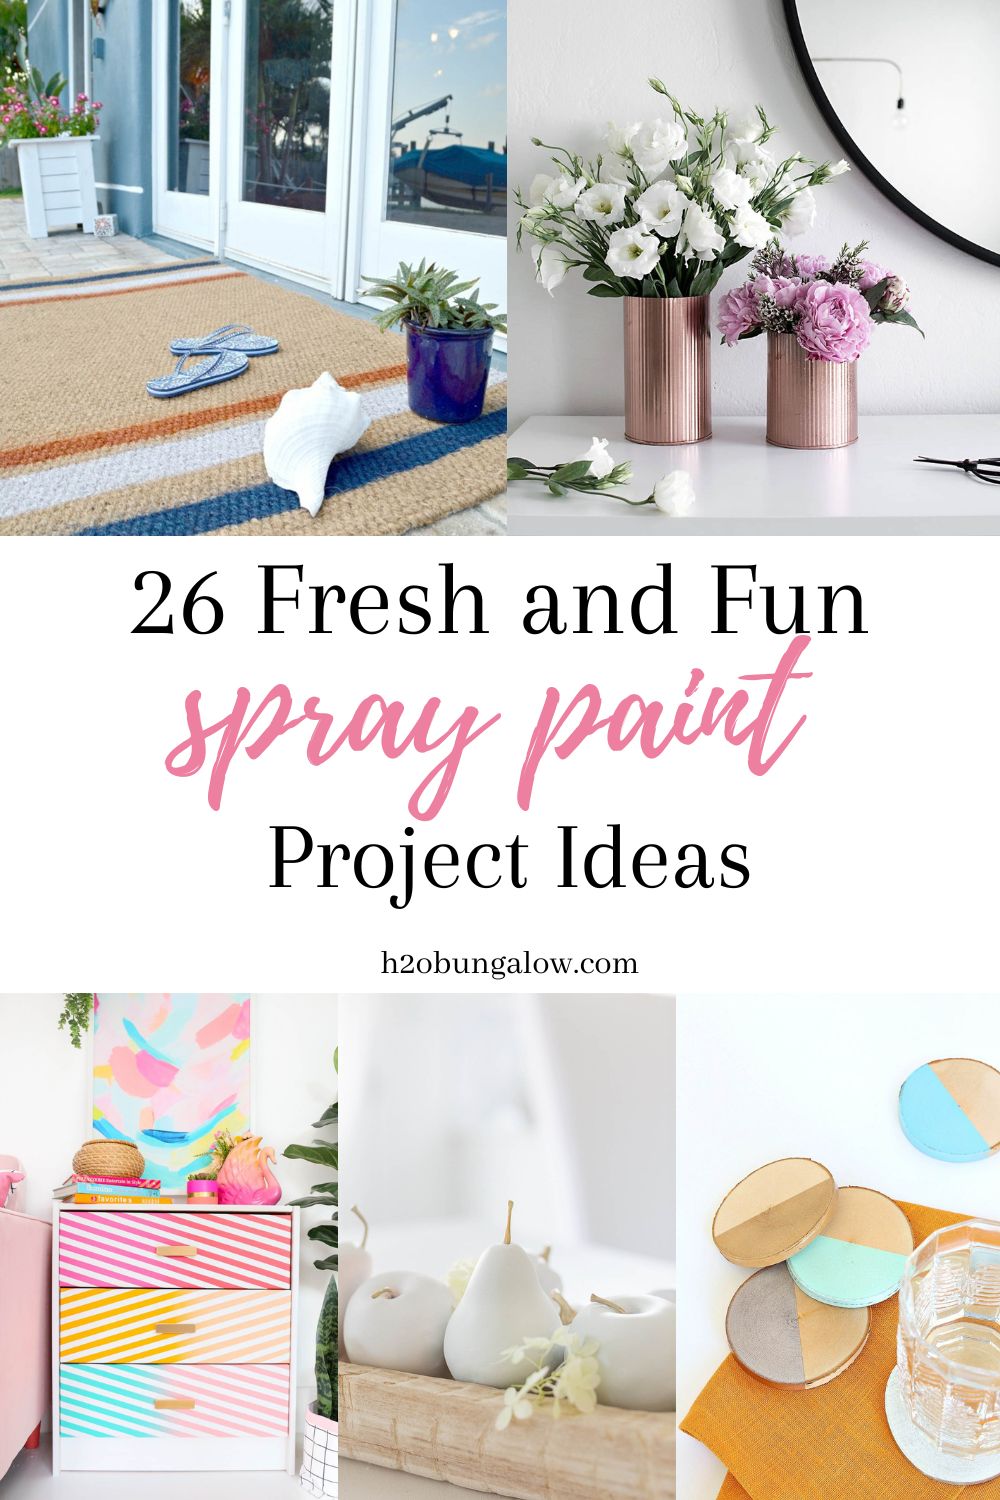 image collage of five spray project ideas with text overlay